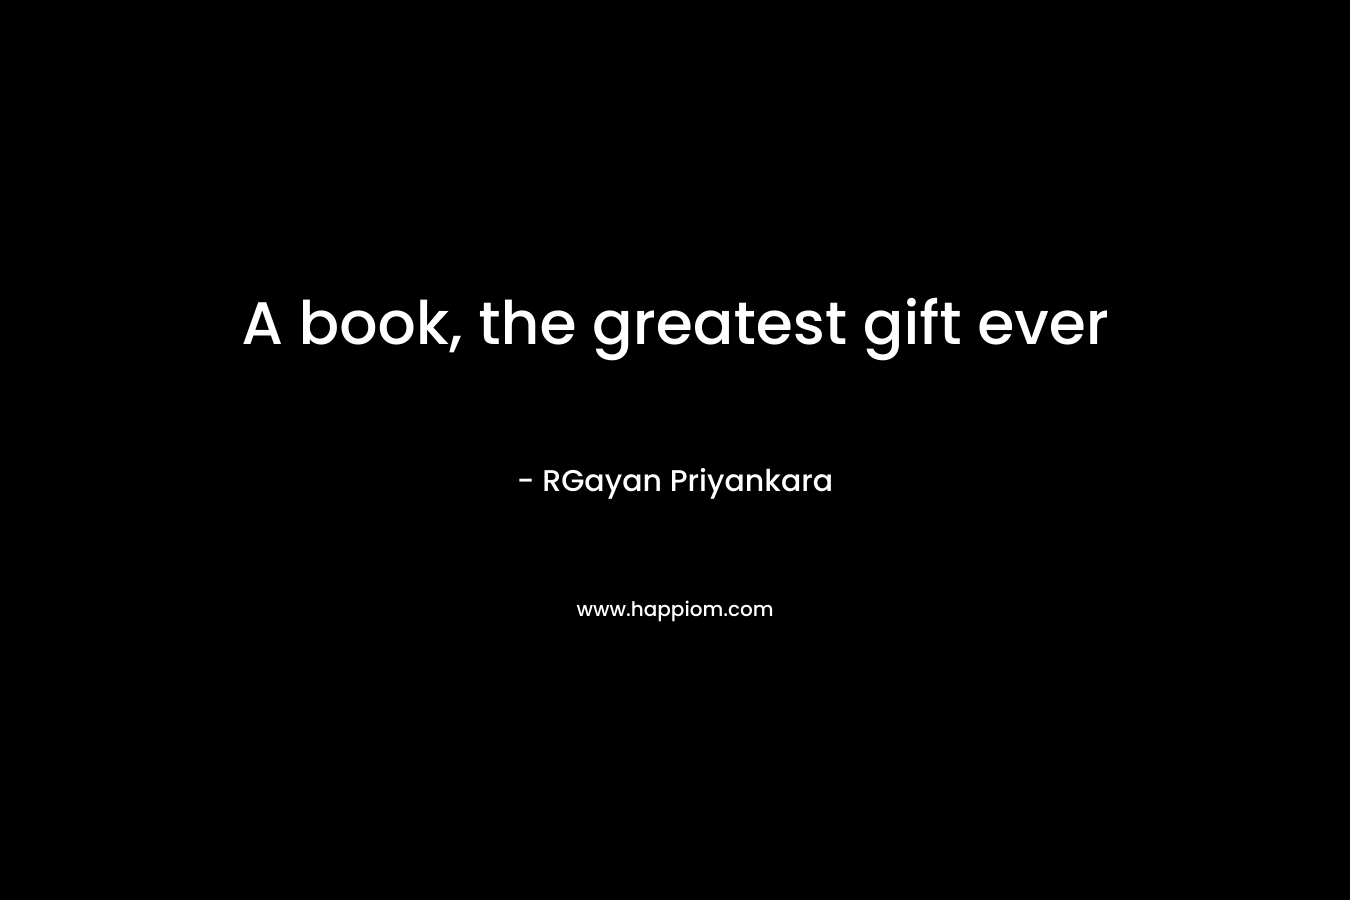 A book, the greatest gift ever